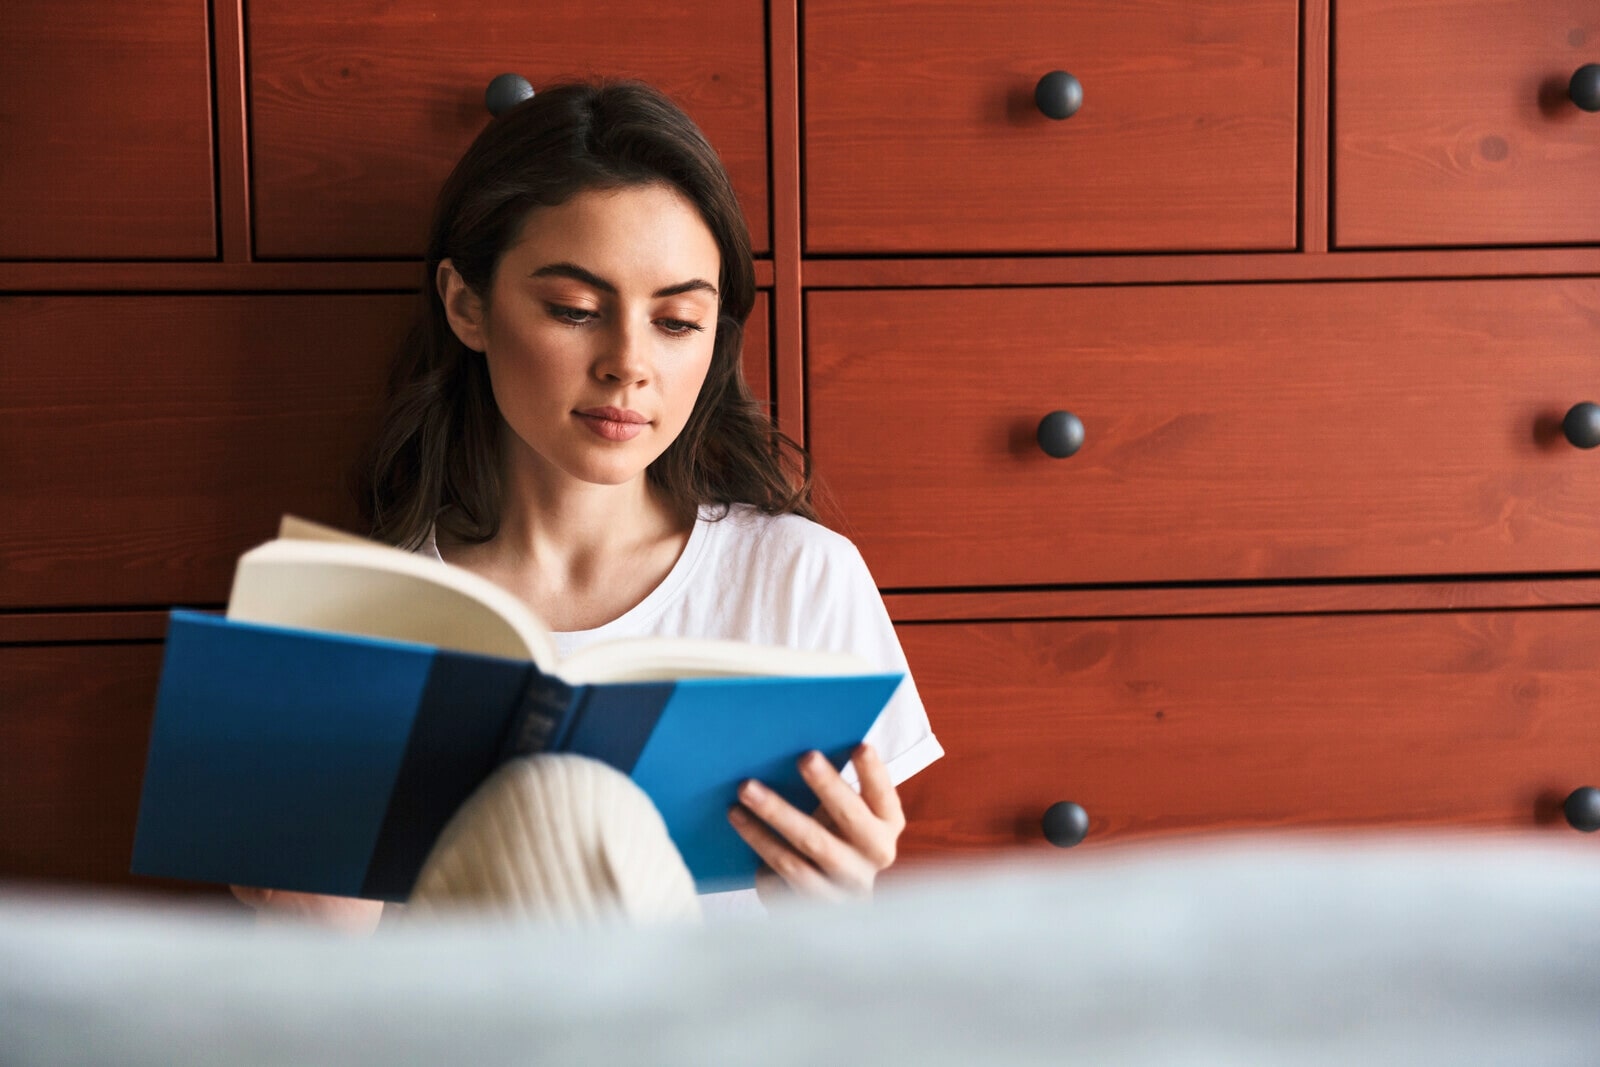 introverted woman sitting on the floor against a chest of drawers reading a book